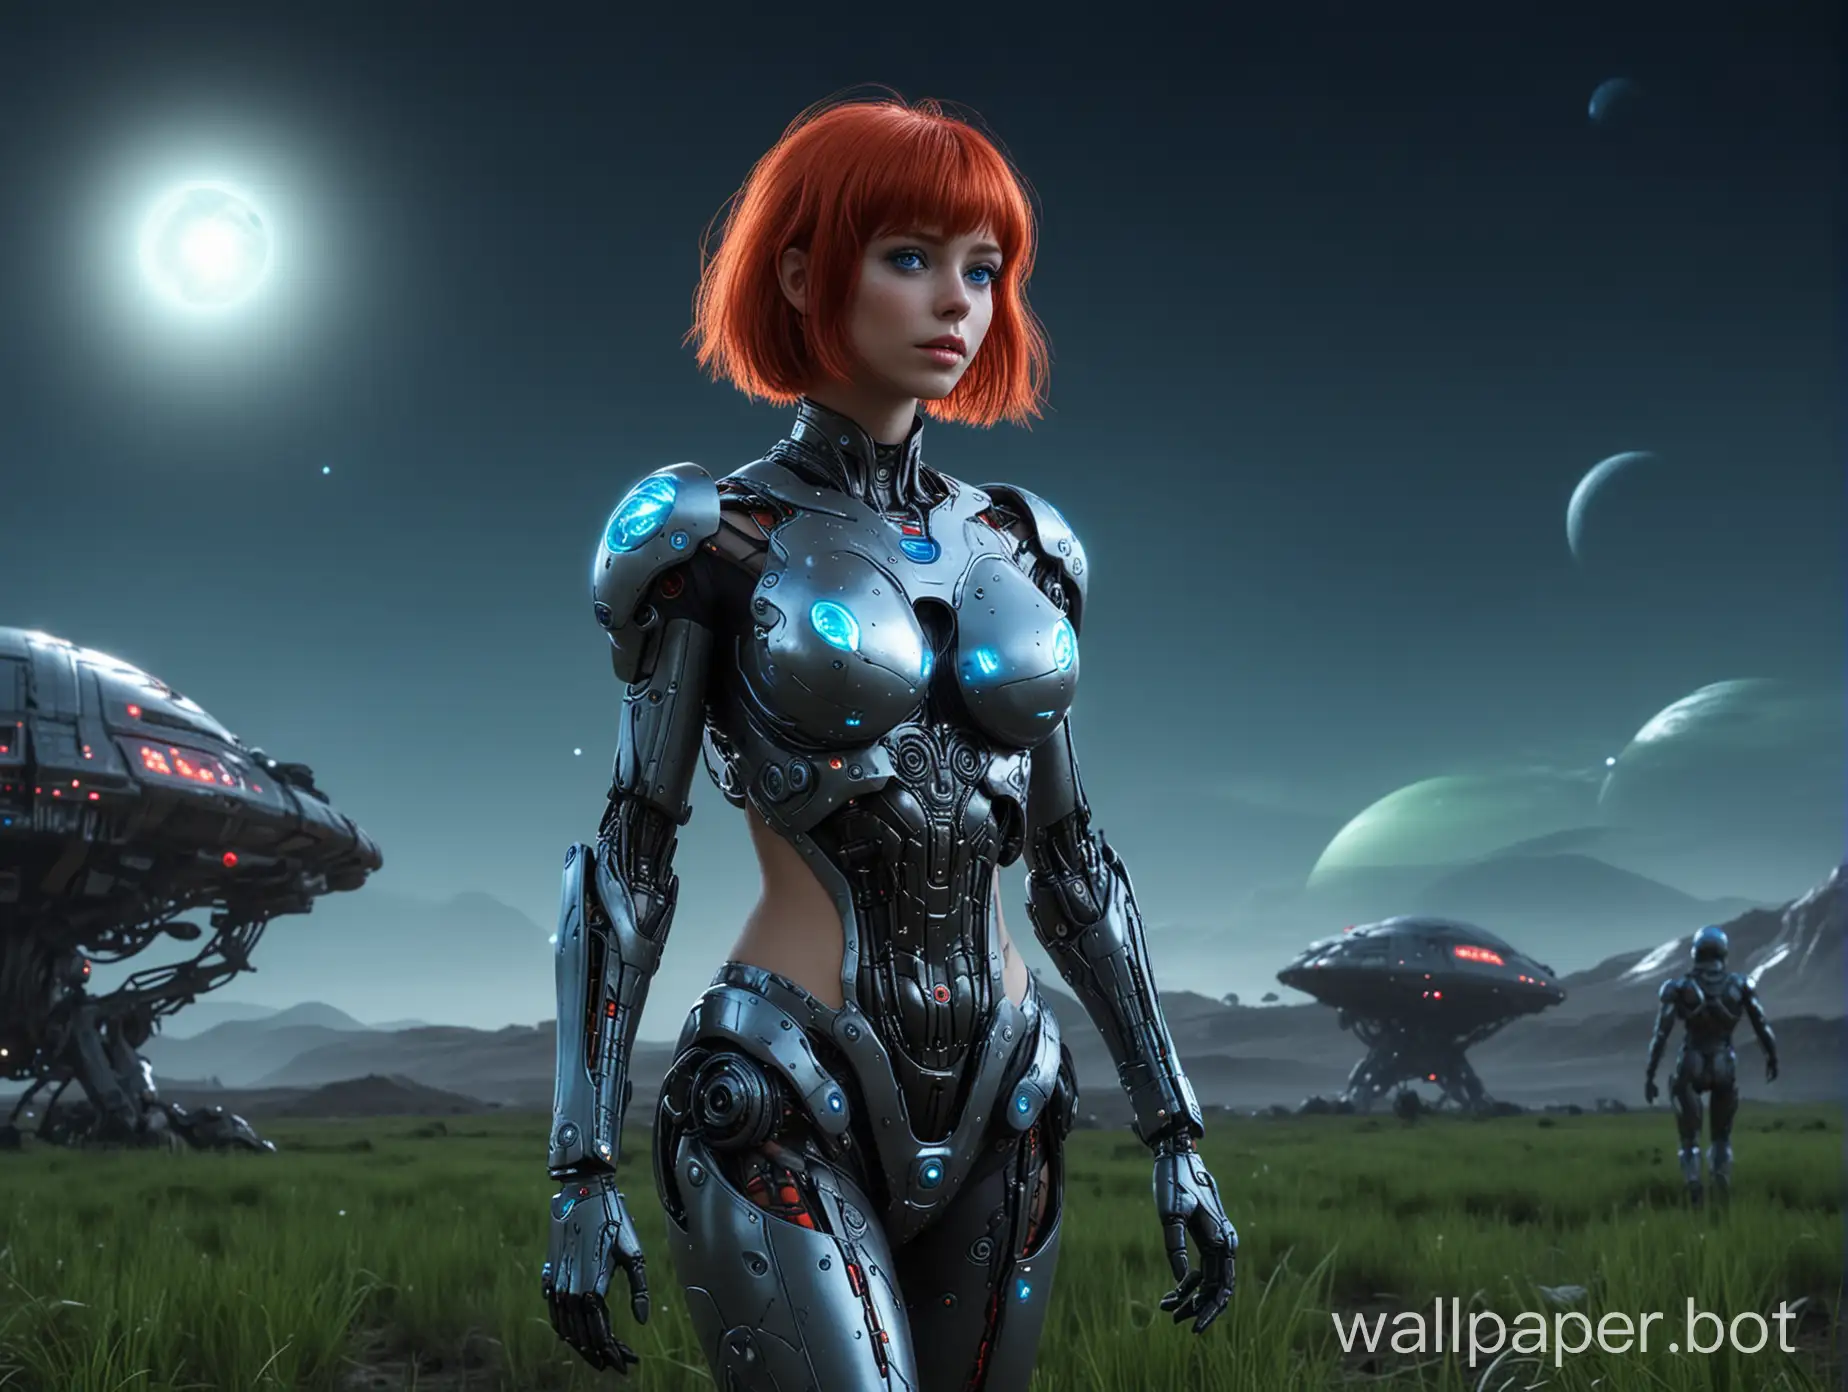 sexual girl cyborg with large breast walks in night field on alien planet, short red hair, futuristic suit, bright blue eyes glowing blue, in full post, green moon in the sky, ufo ships flying in the sky, in science fiction genre